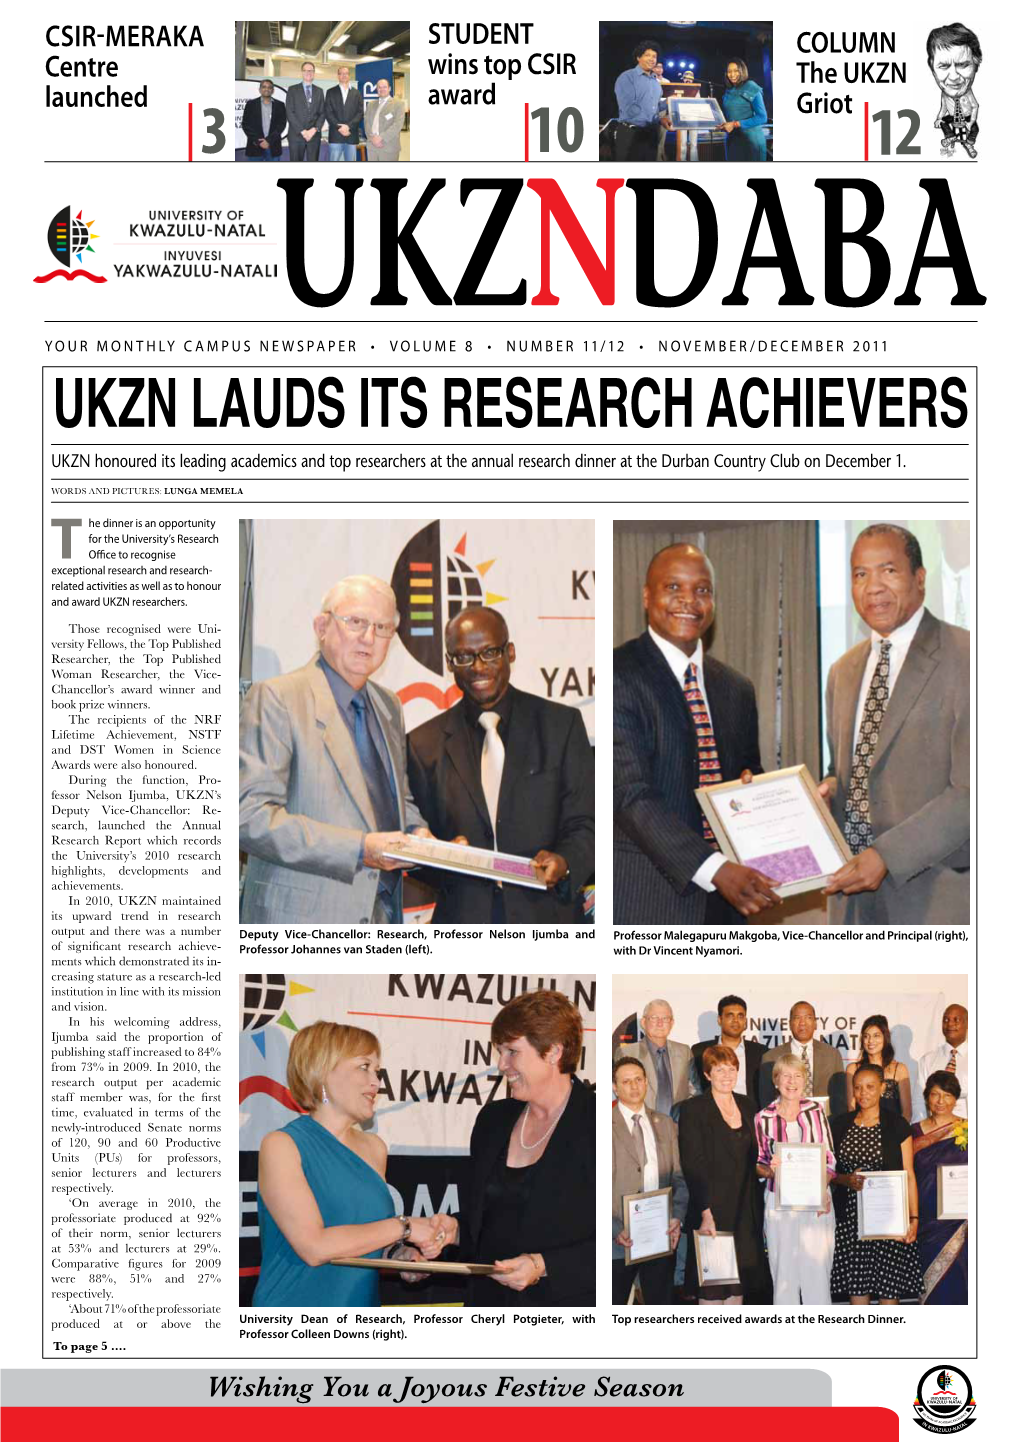 UKZN Lauds Its Research Achievers UKZN Honoured Its Leading Academics and Top Researchers at the Annual Research Dinner at the Durban Country Club on December 1